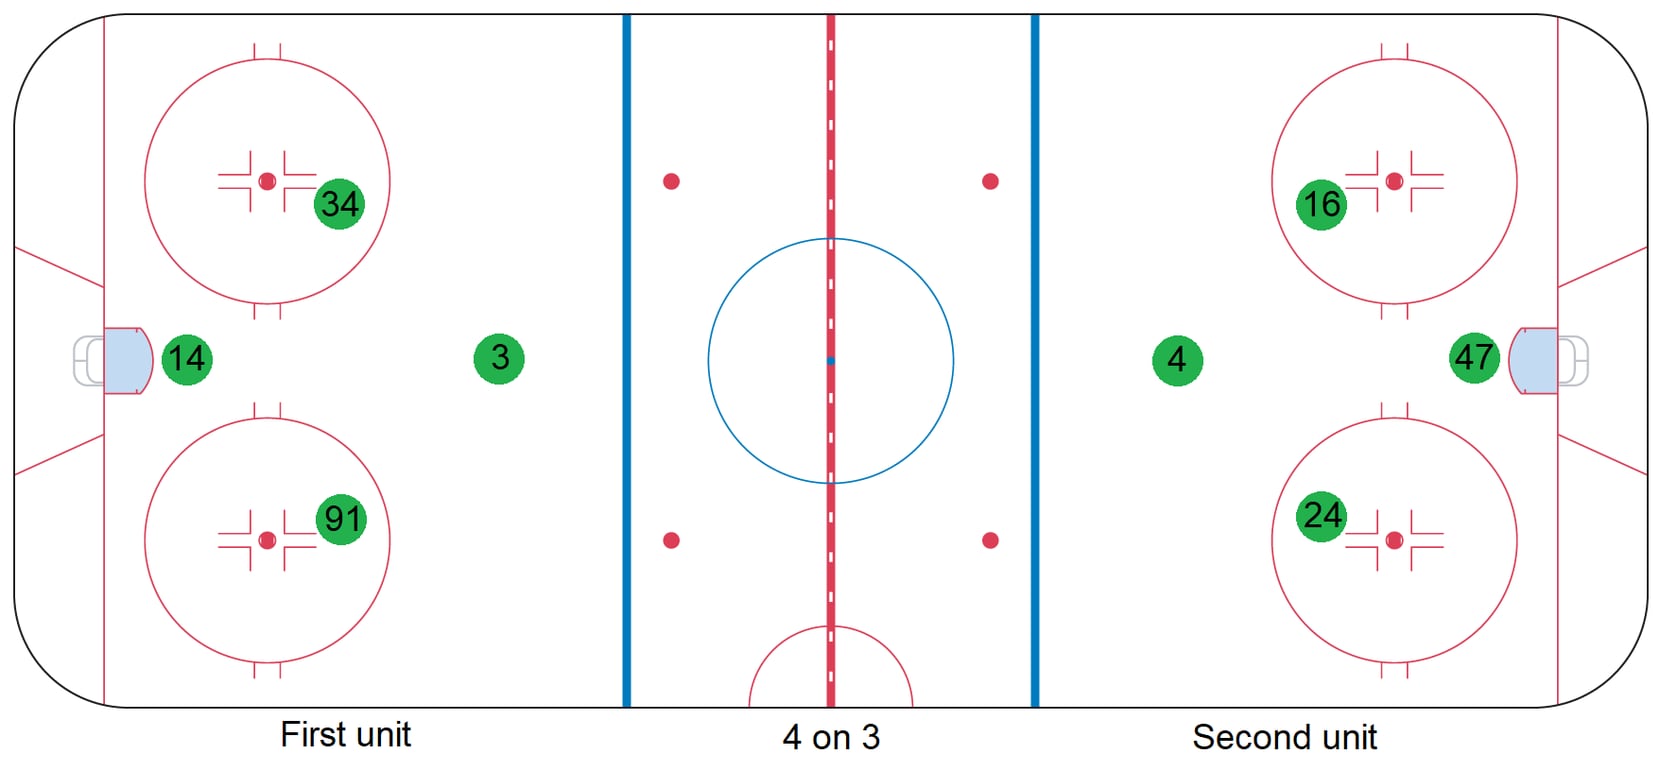 The Stars' 4 on 3 power play formations shown during training camp in July 2020.